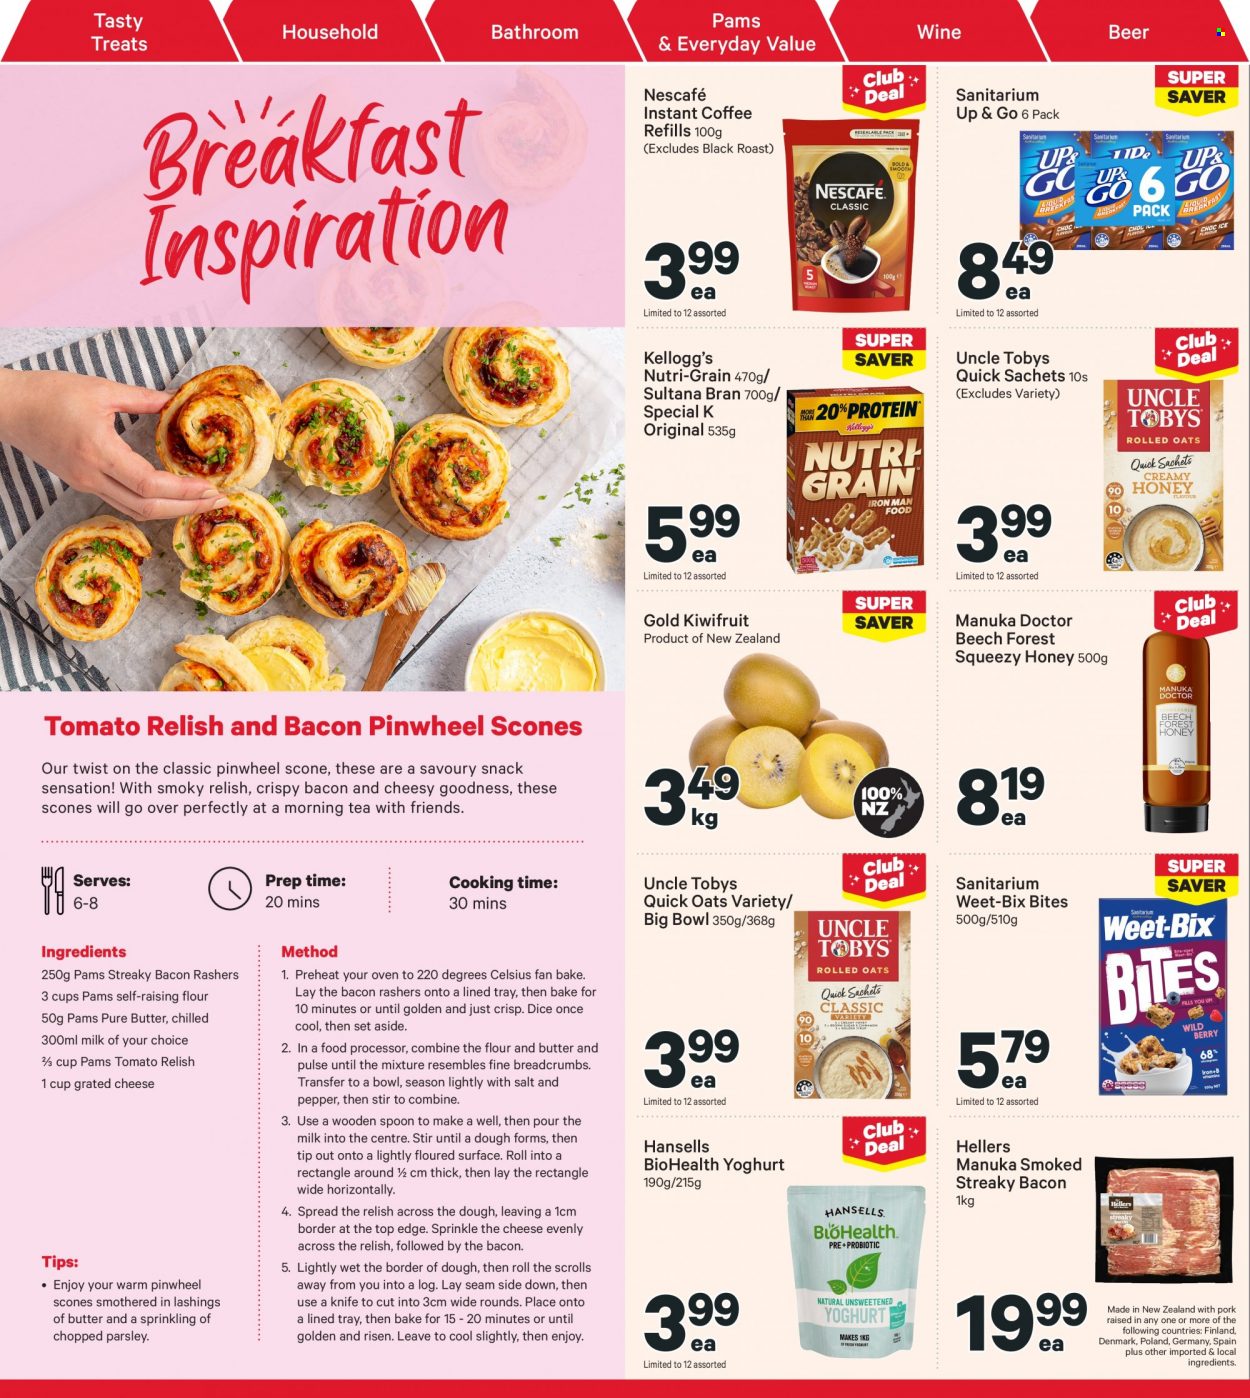 thumbnail - New World mailer - 23.05.2022 - 29.05.2022 - Sales products - parsley, kiwi, bacon, streaky bacon, cheese, grated cheese, yoghurt, milk, snack, cereal bar, Kellogg's, flour, oats, Weet-Bix, Quick Oats, Nutri-Grain, pepper, honey, tea, instant coffee, Nescafé, wine, beer, knife, spoon. Page 14.